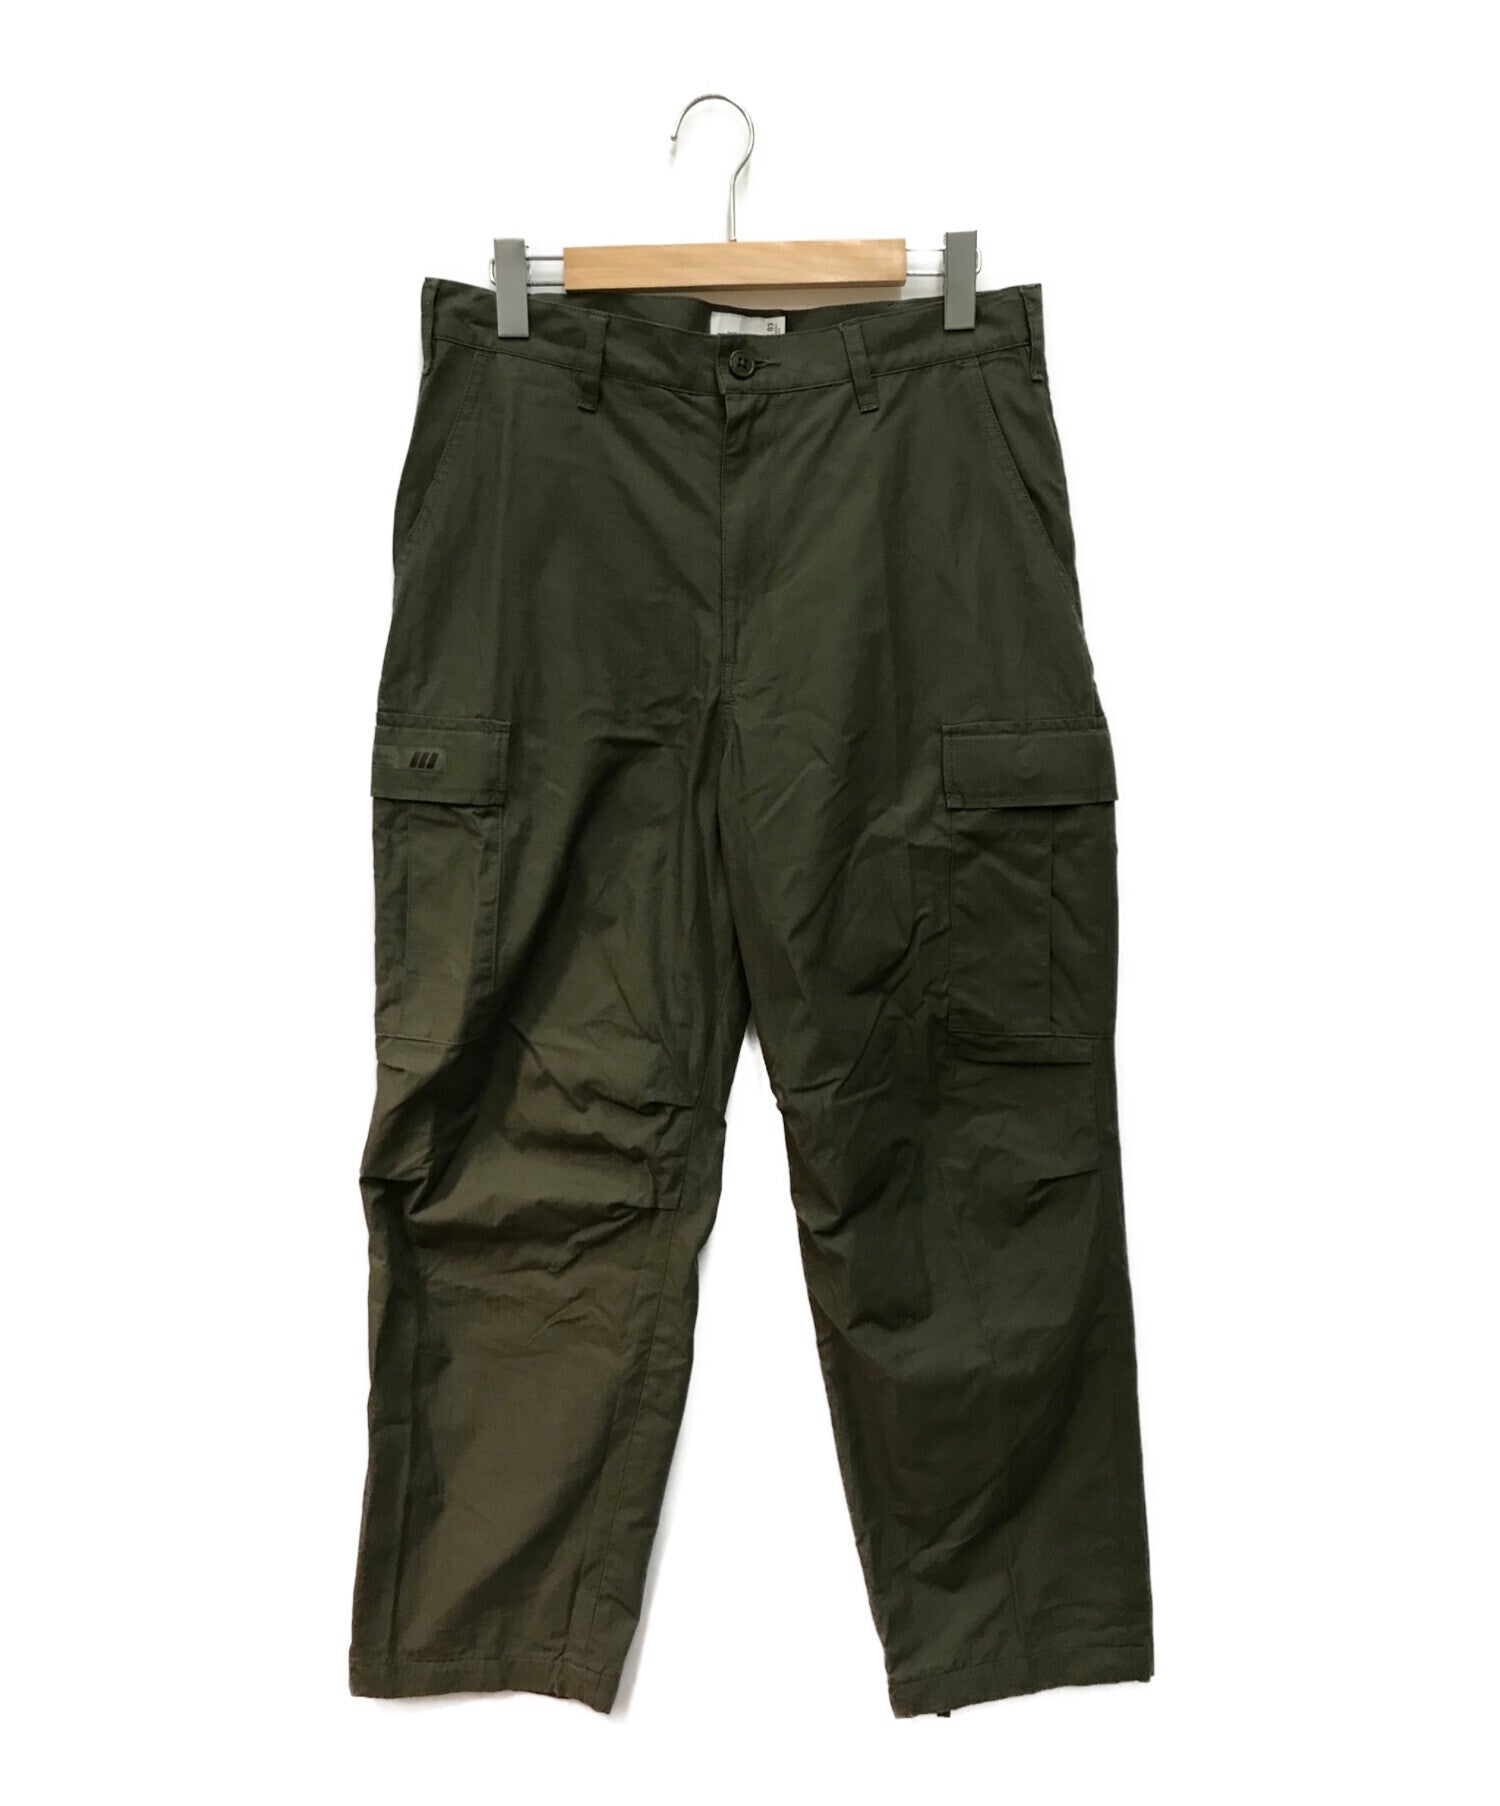 WTAPS JUNGLE STOCK TROUSERS COTTON.RIPSTOP cargo pants ripstop